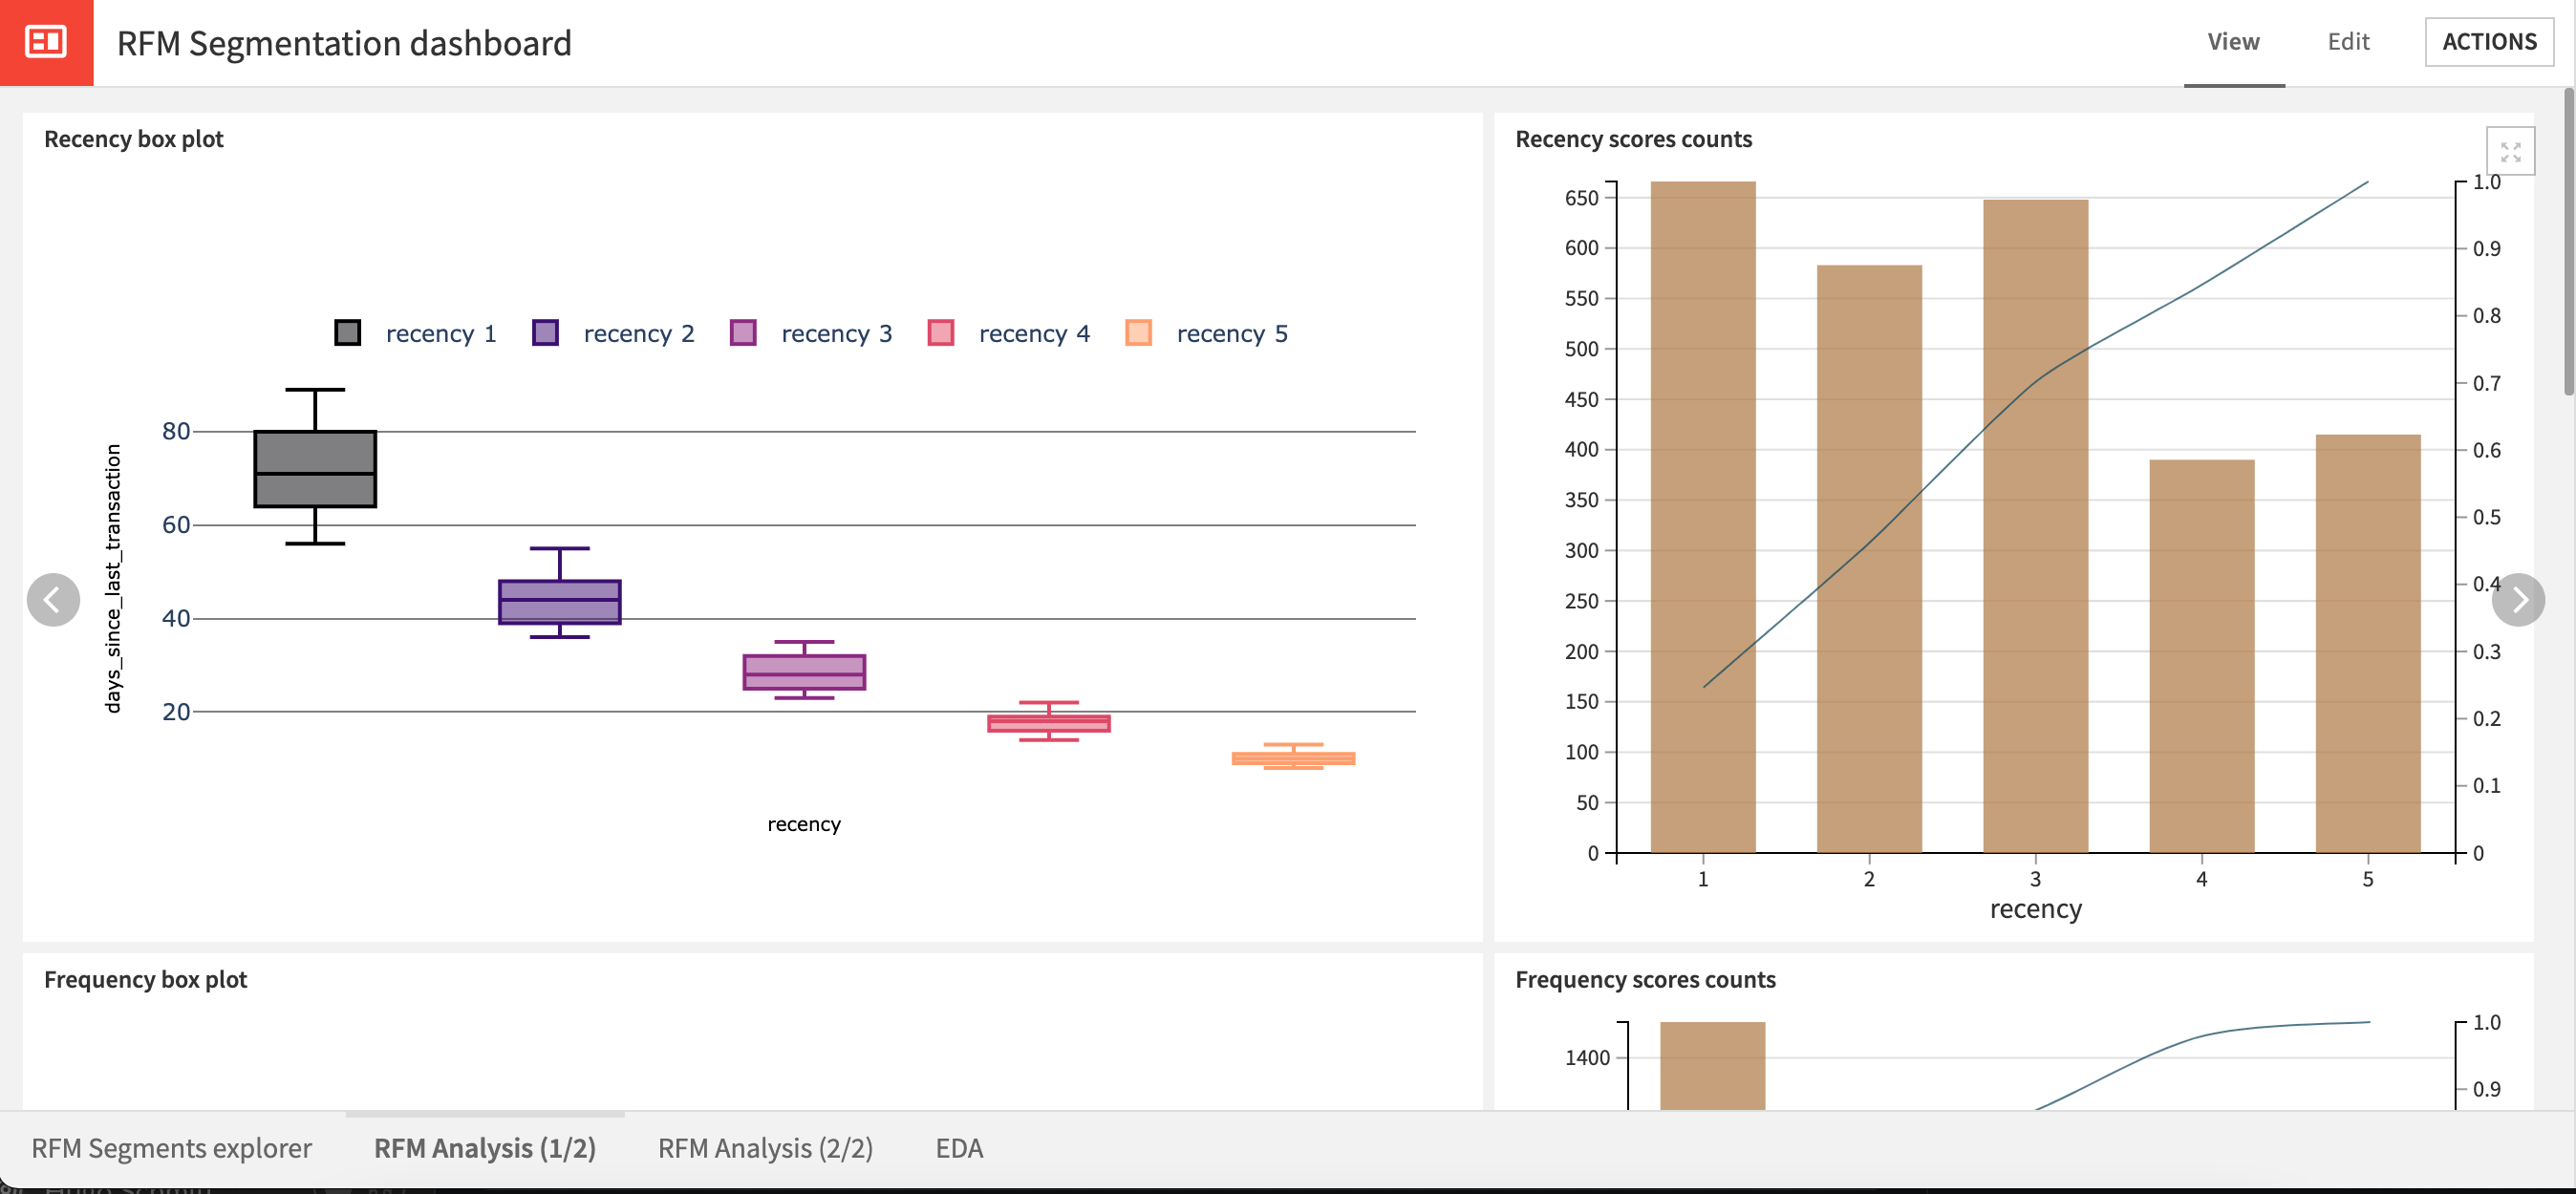 Dataiku screenshot showing a sample of the other visualizations available in the RFM Segmentation dashboard.